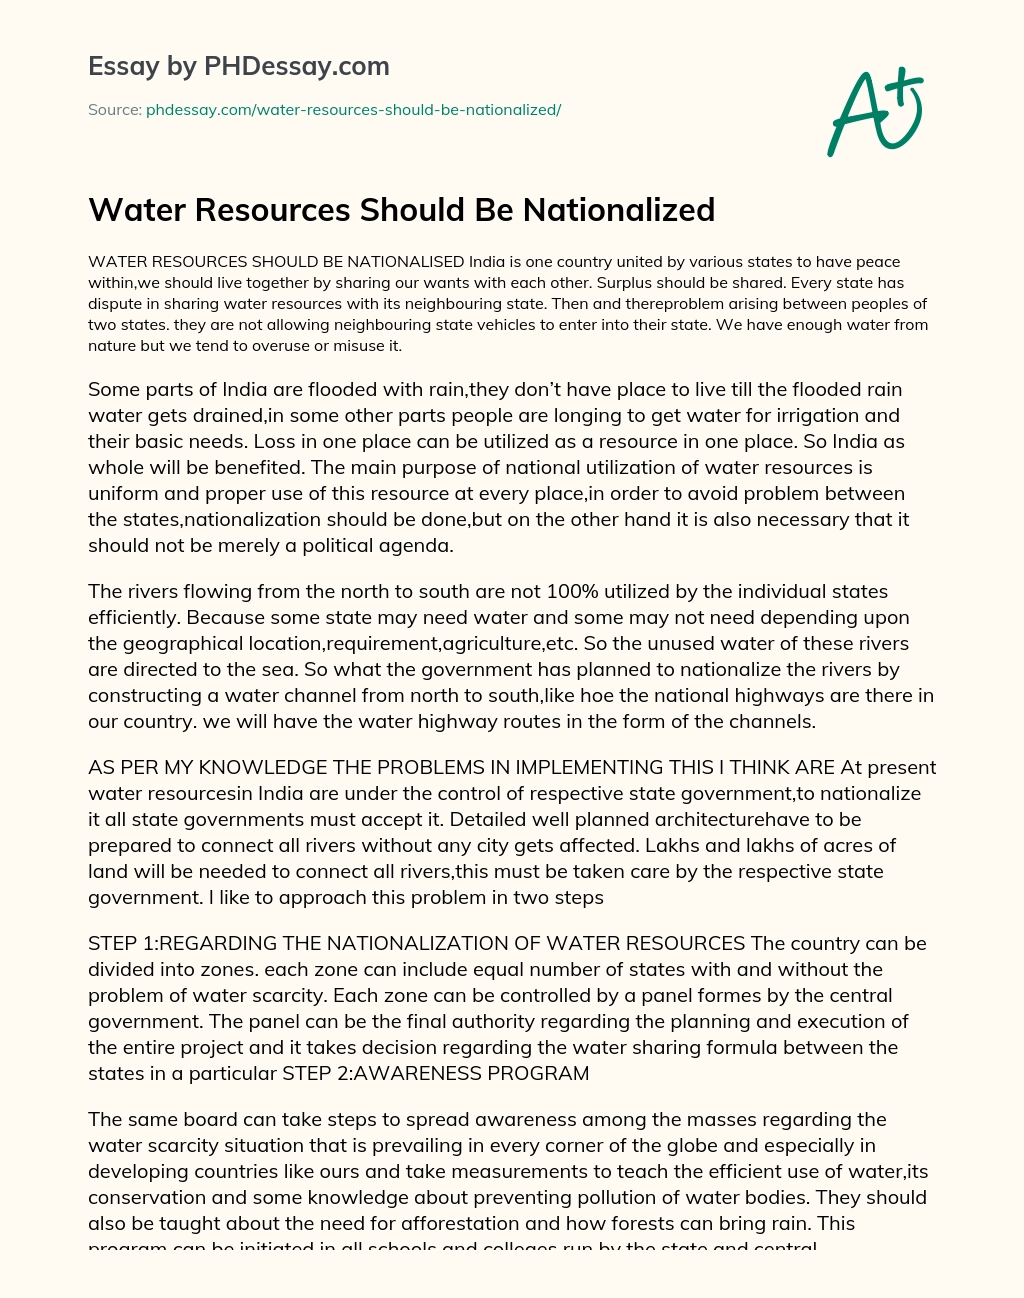 Water Resources Should Be Nationalized essay